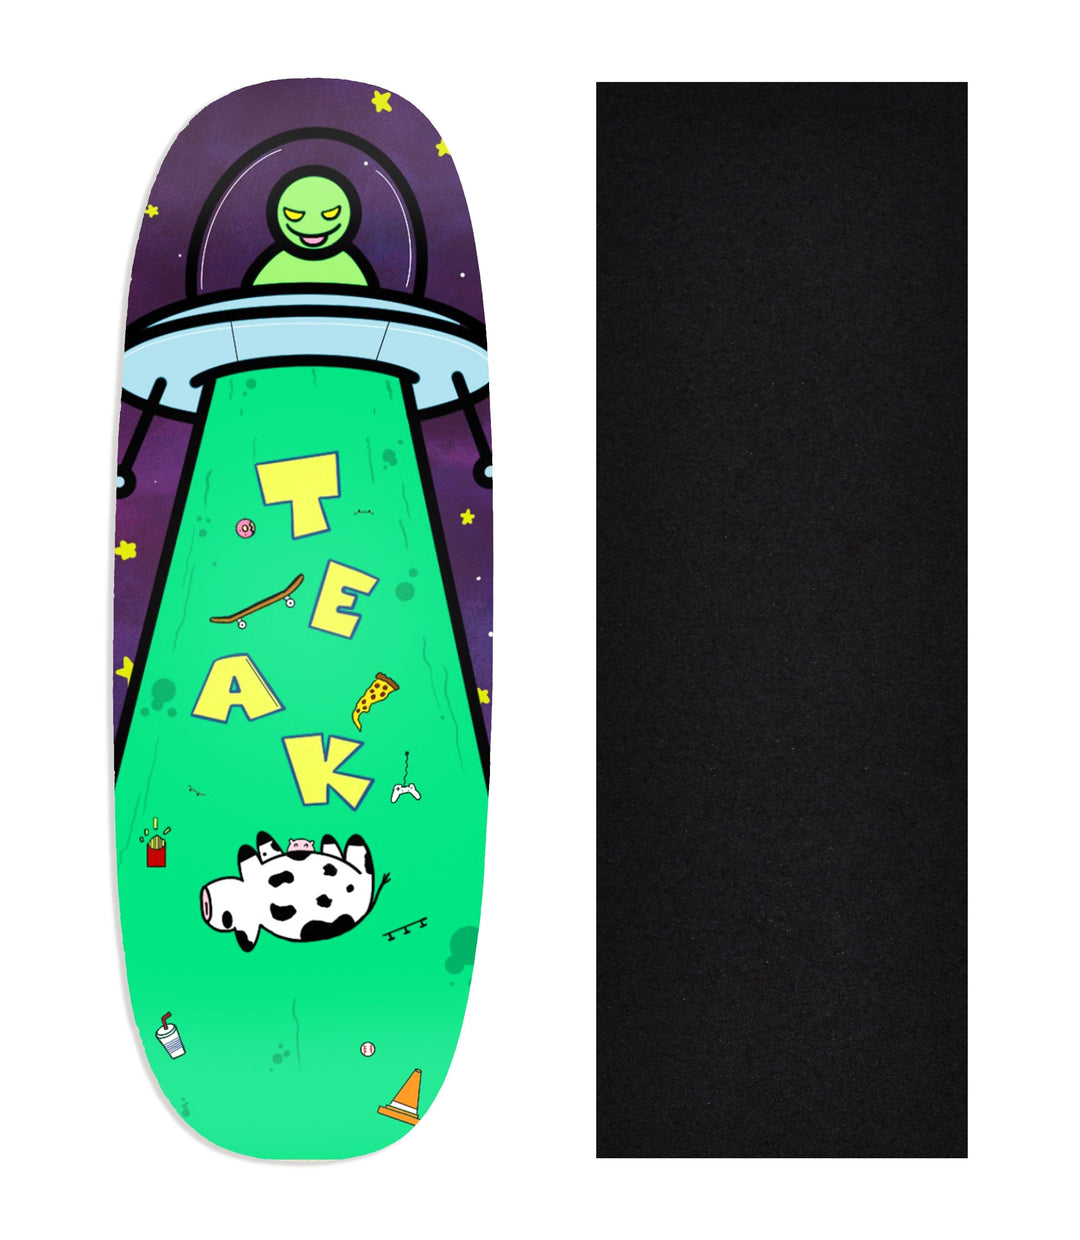 Teak Tuning Heat Transfer Graphic Wooden Fingerboard Deck, @plaguefingers - Entry#83 Ohhh Deck